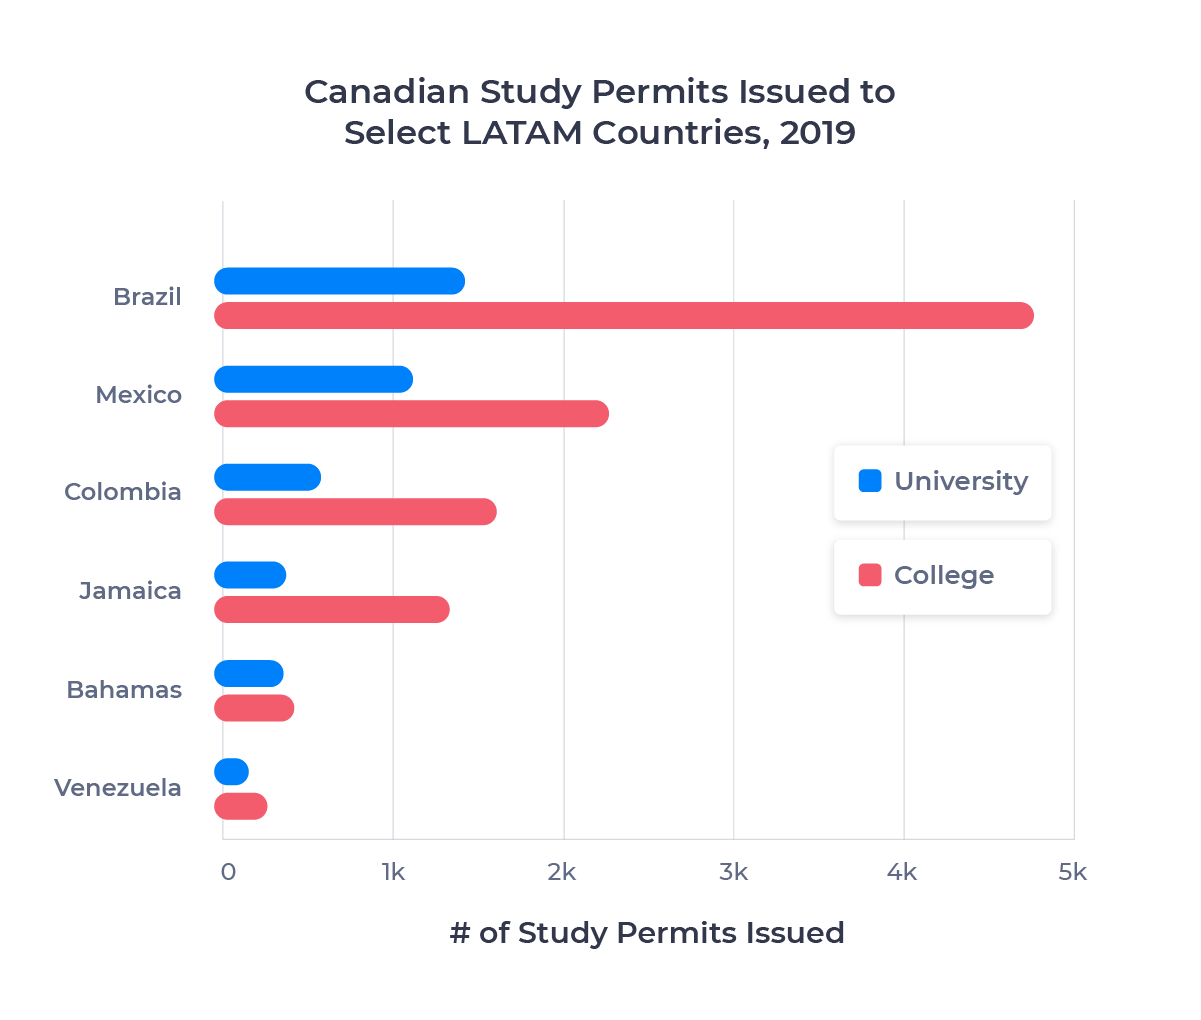 Bar chart showing the number of Canadian study permits issued to six LATAM countries in 2019 for college and university study. Described in detail below.